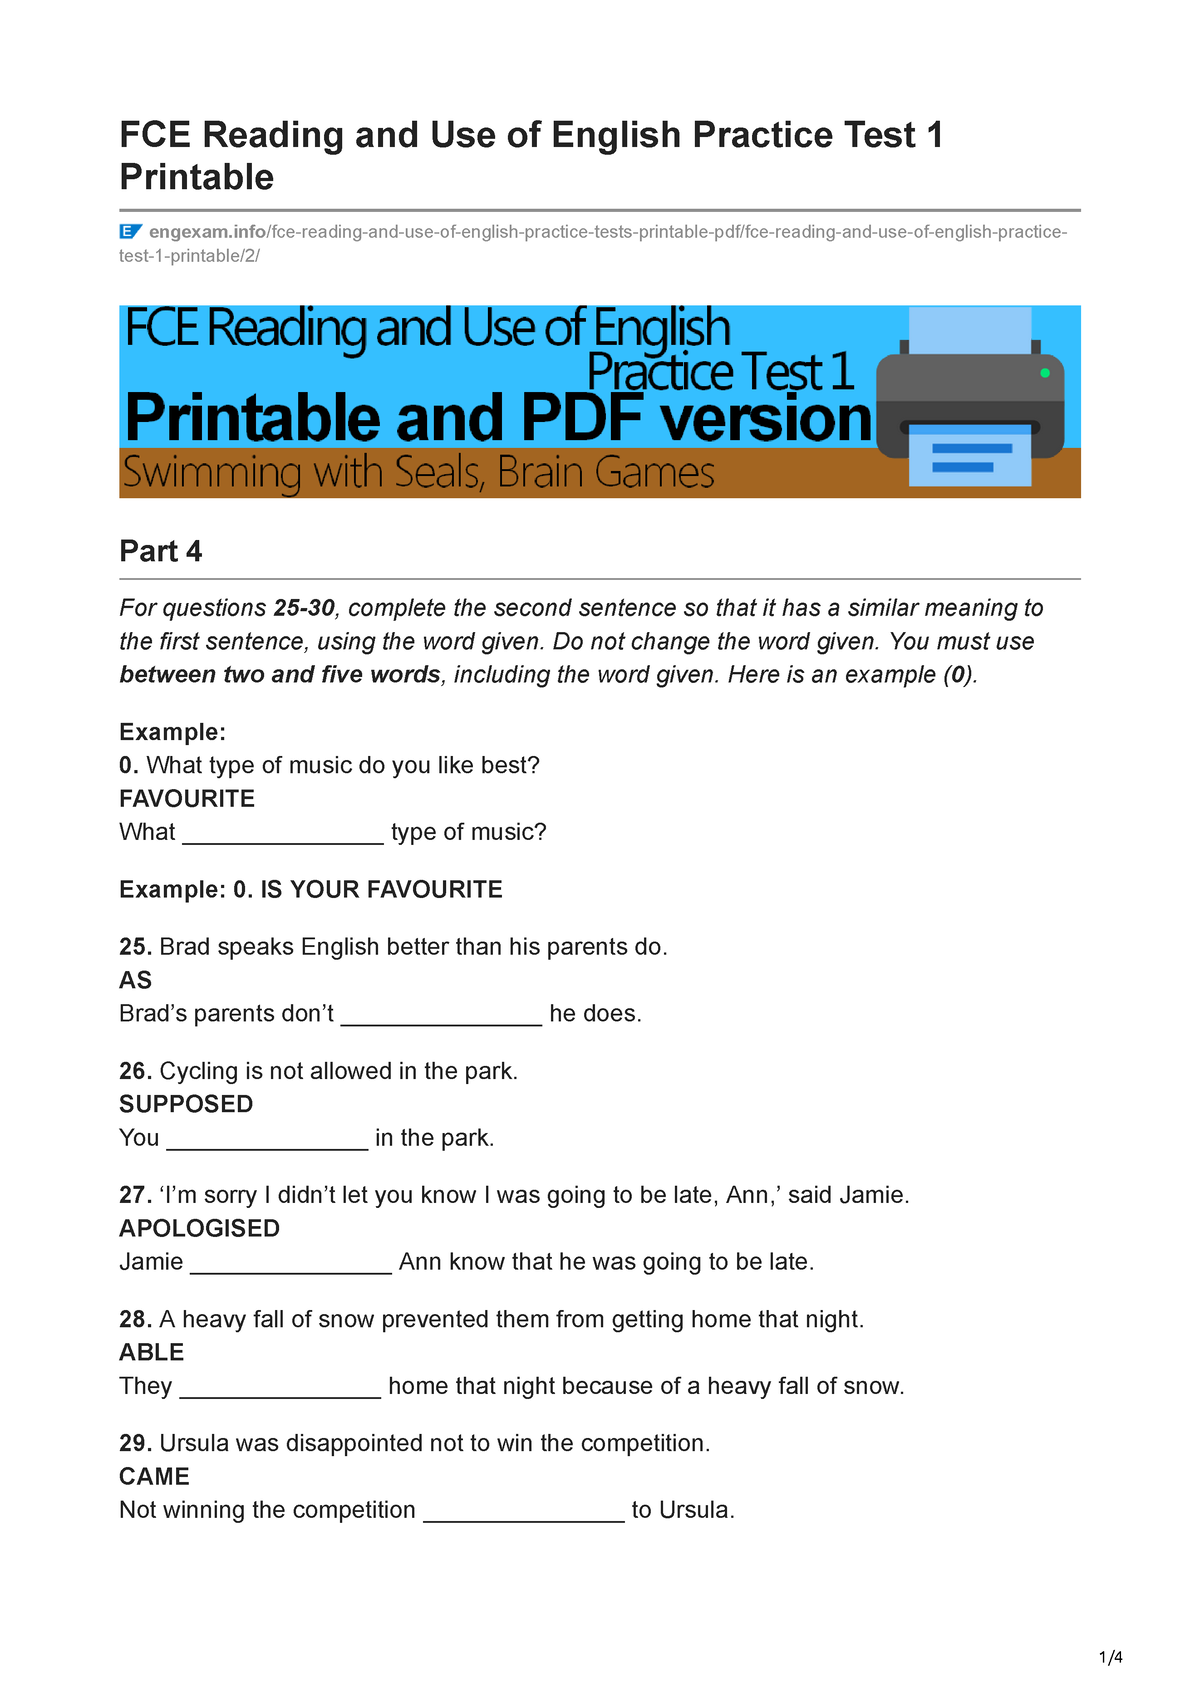 engexam-info-fce-reading-and-use-of-english-practice-test-1-printable-fce-reading-and-use-of